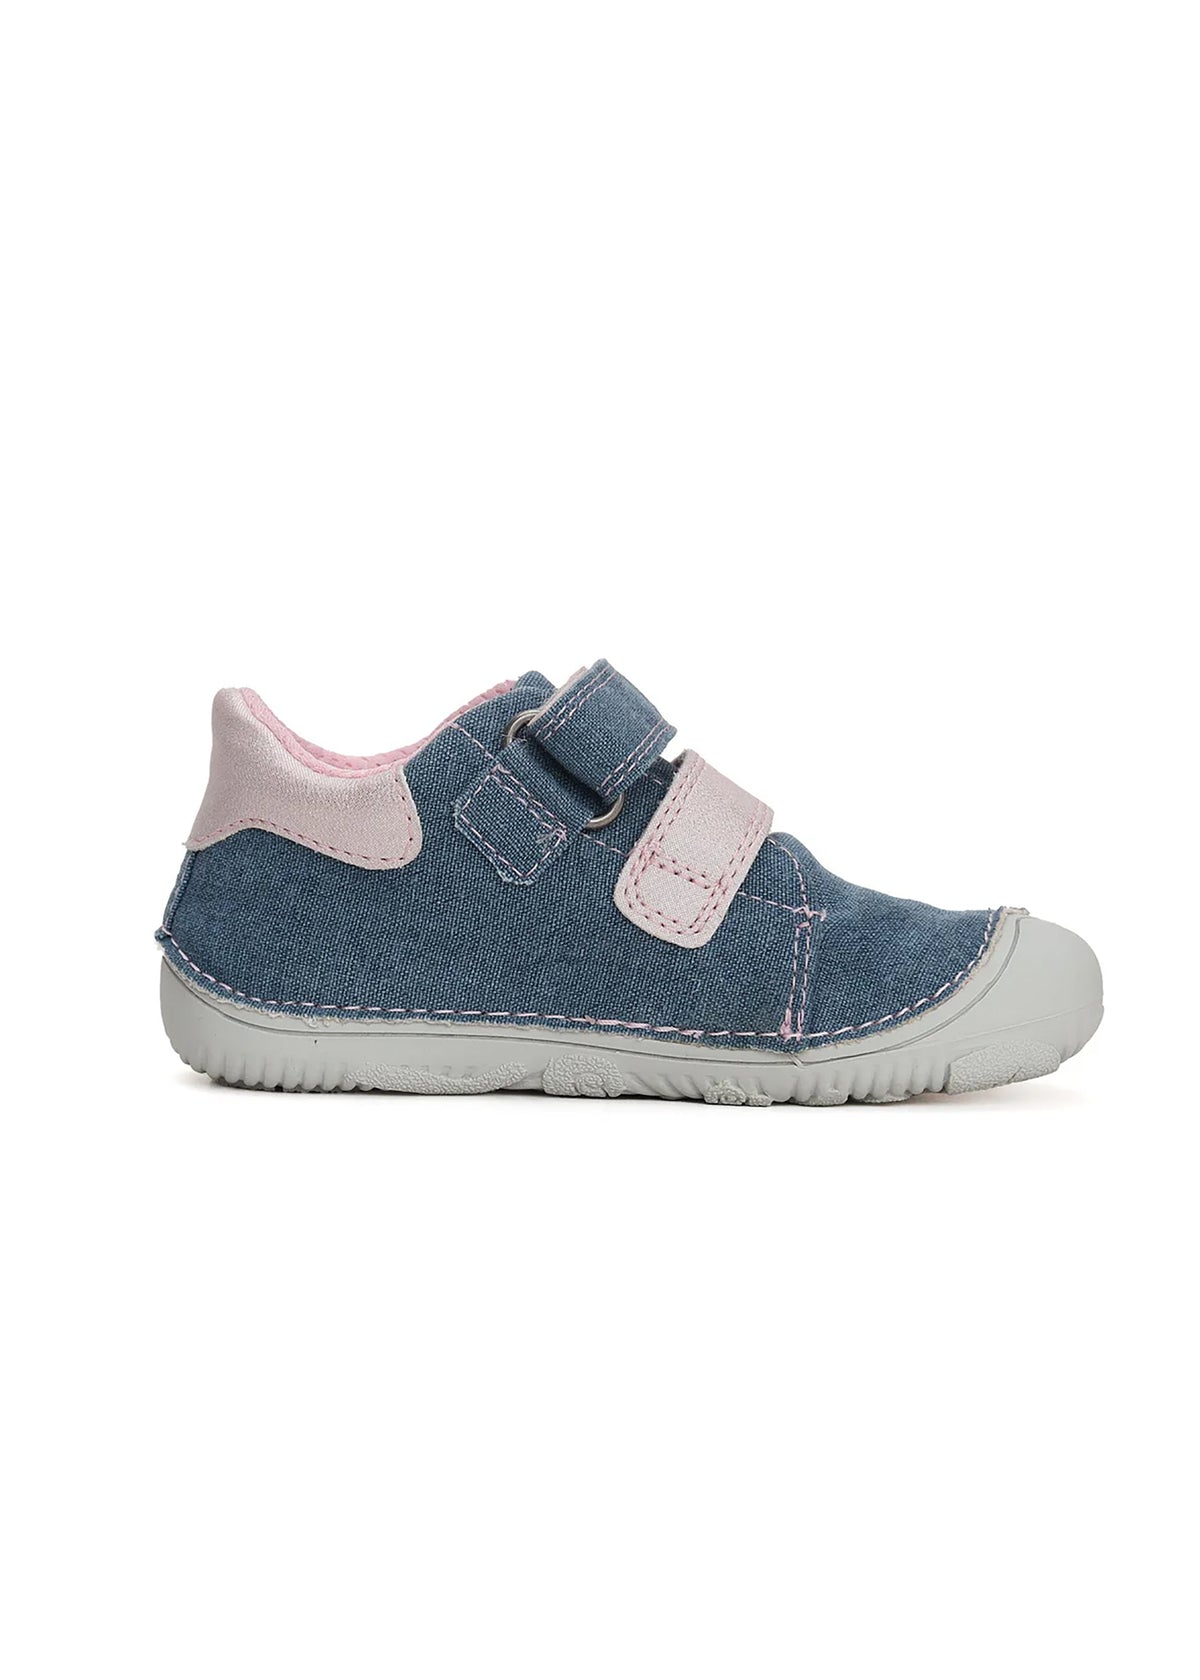 Children's first-step shoes - blue canvas fabric, pink patterns